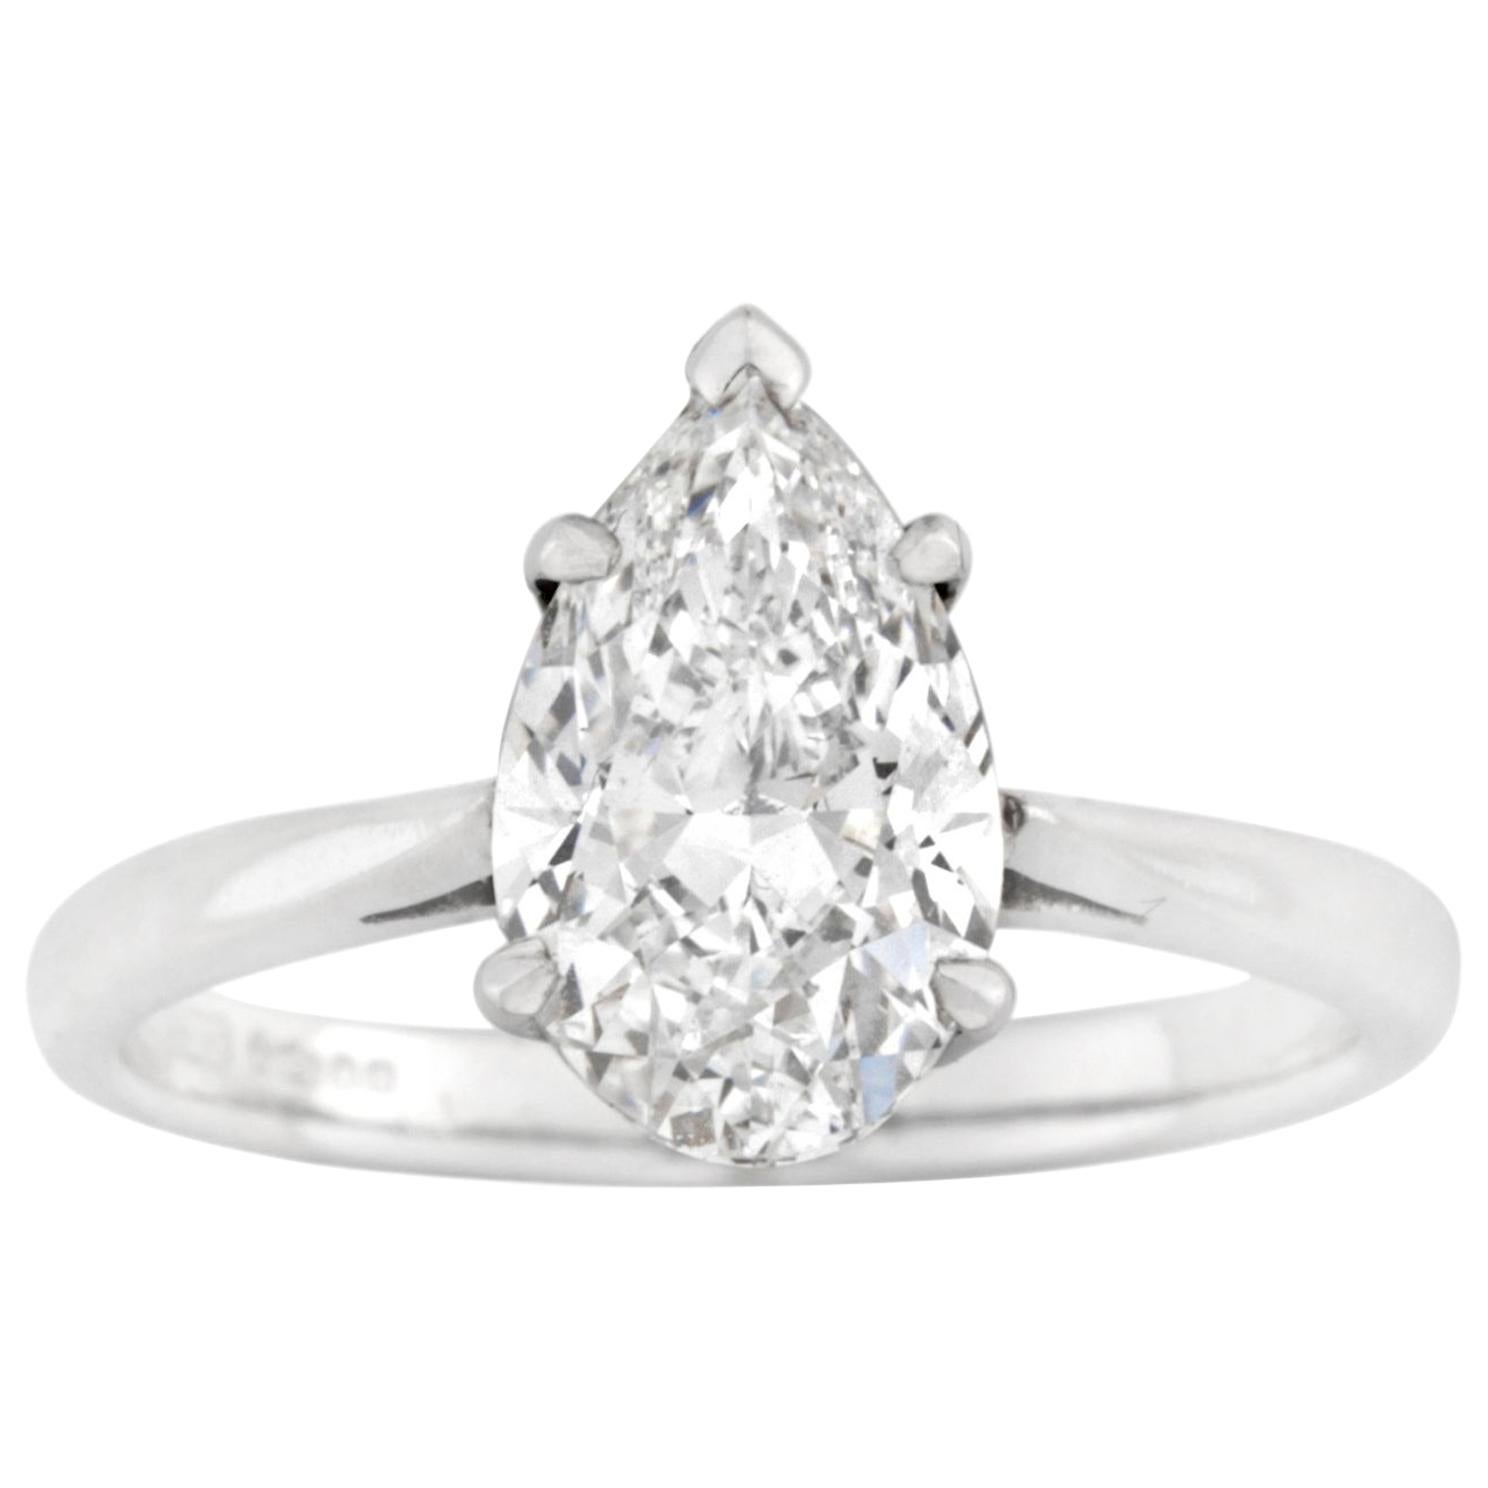 Certified 2.00 Carat Pear-Shaped Solitaire Diamond Ring